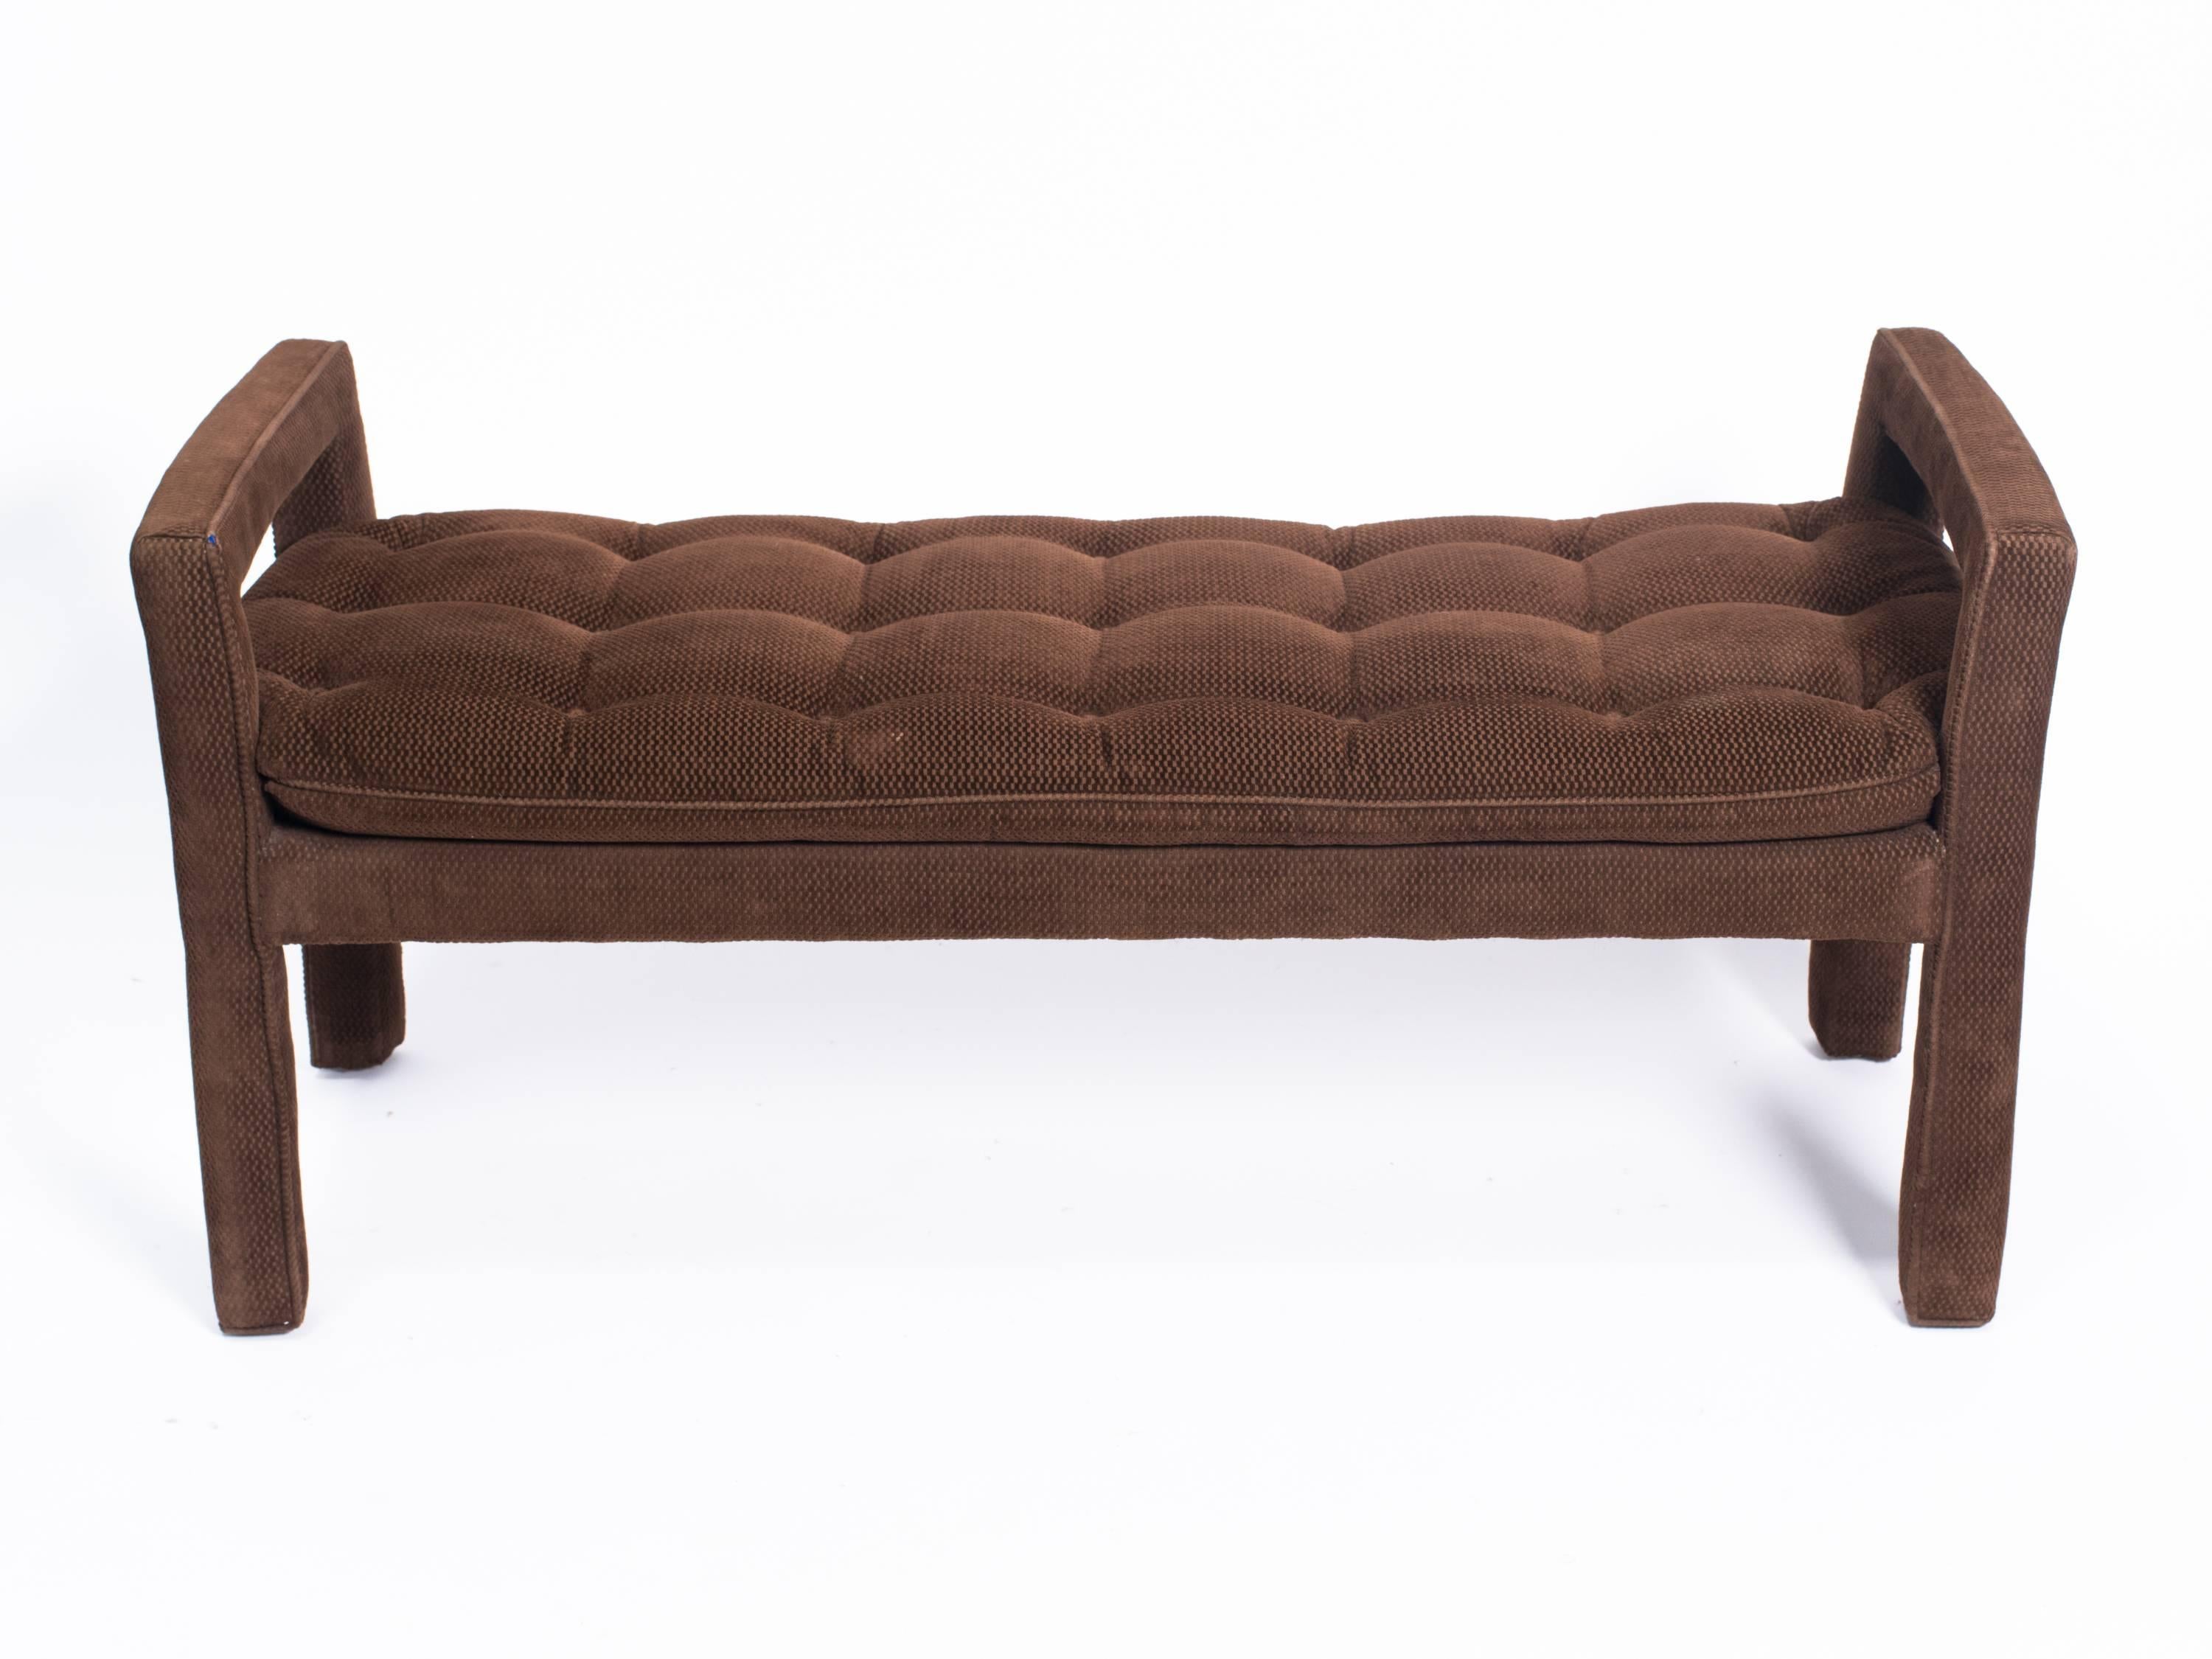 Long upholstered tufted bench in brown.